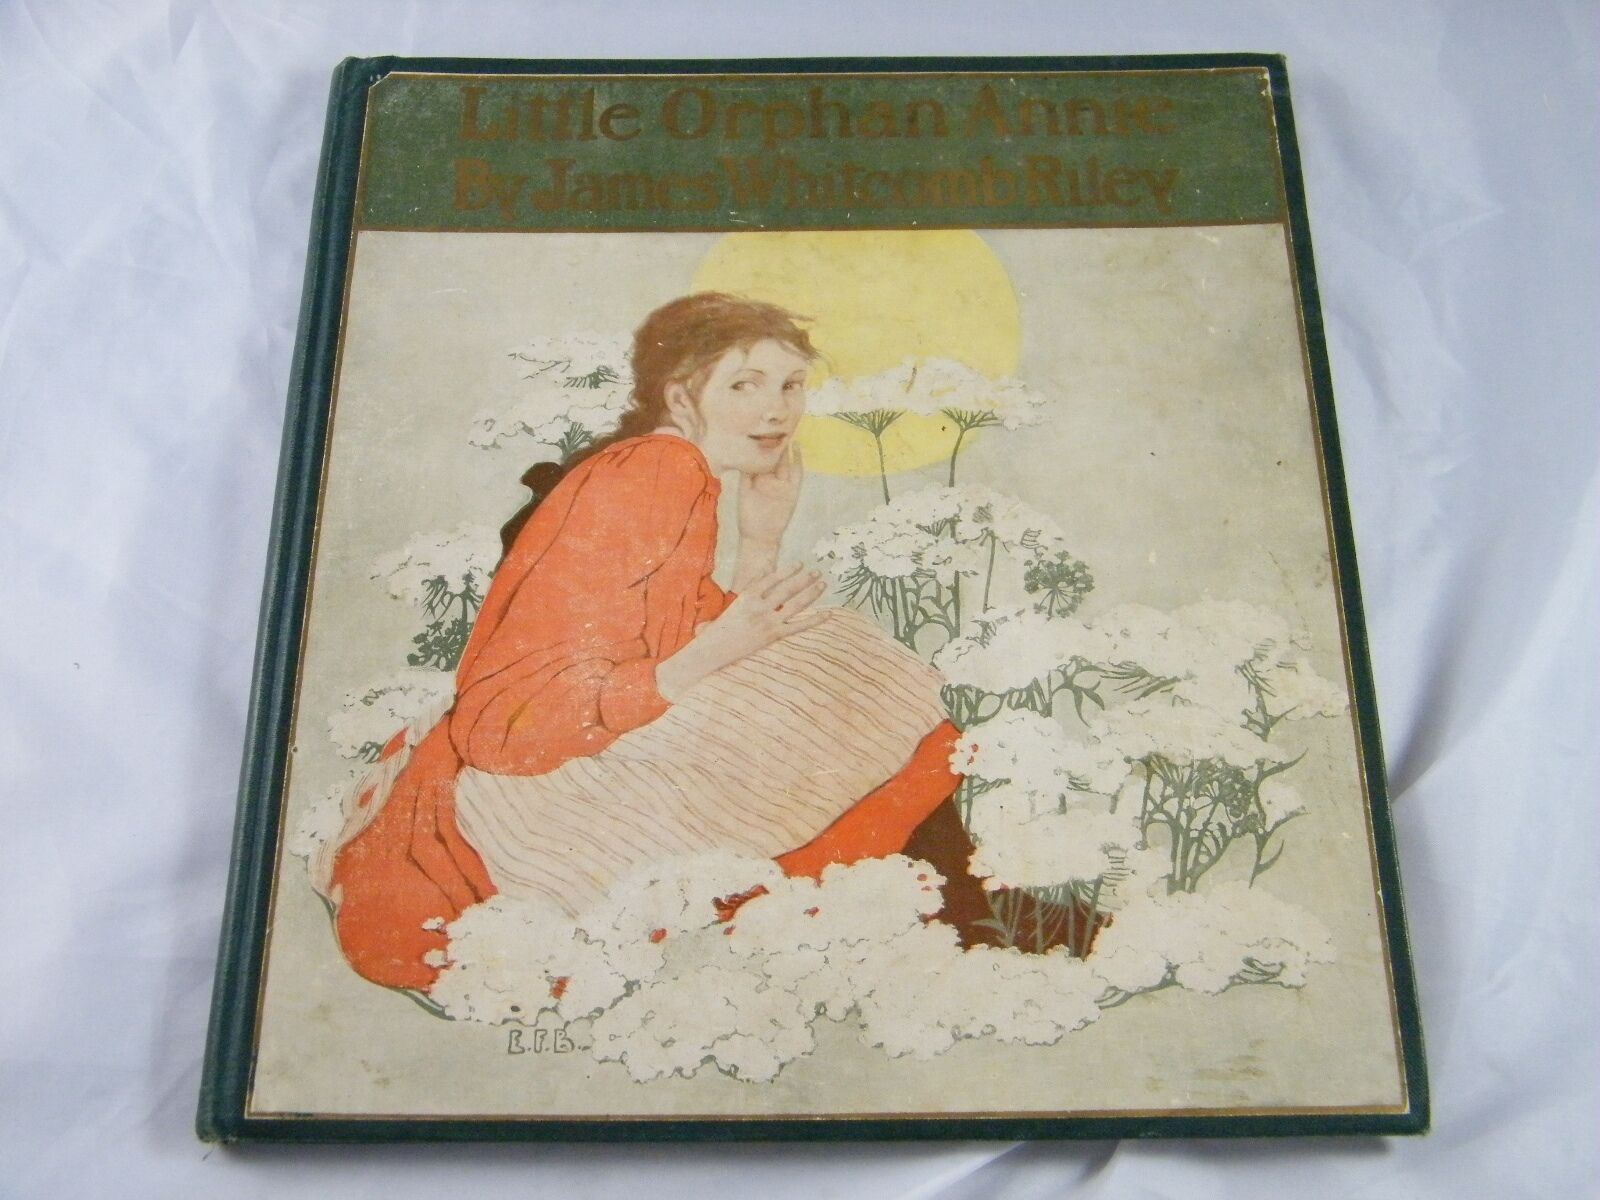 1908 LITTLE ORPHAN ANNIE BY JAMES WHITCOMB RILEY 